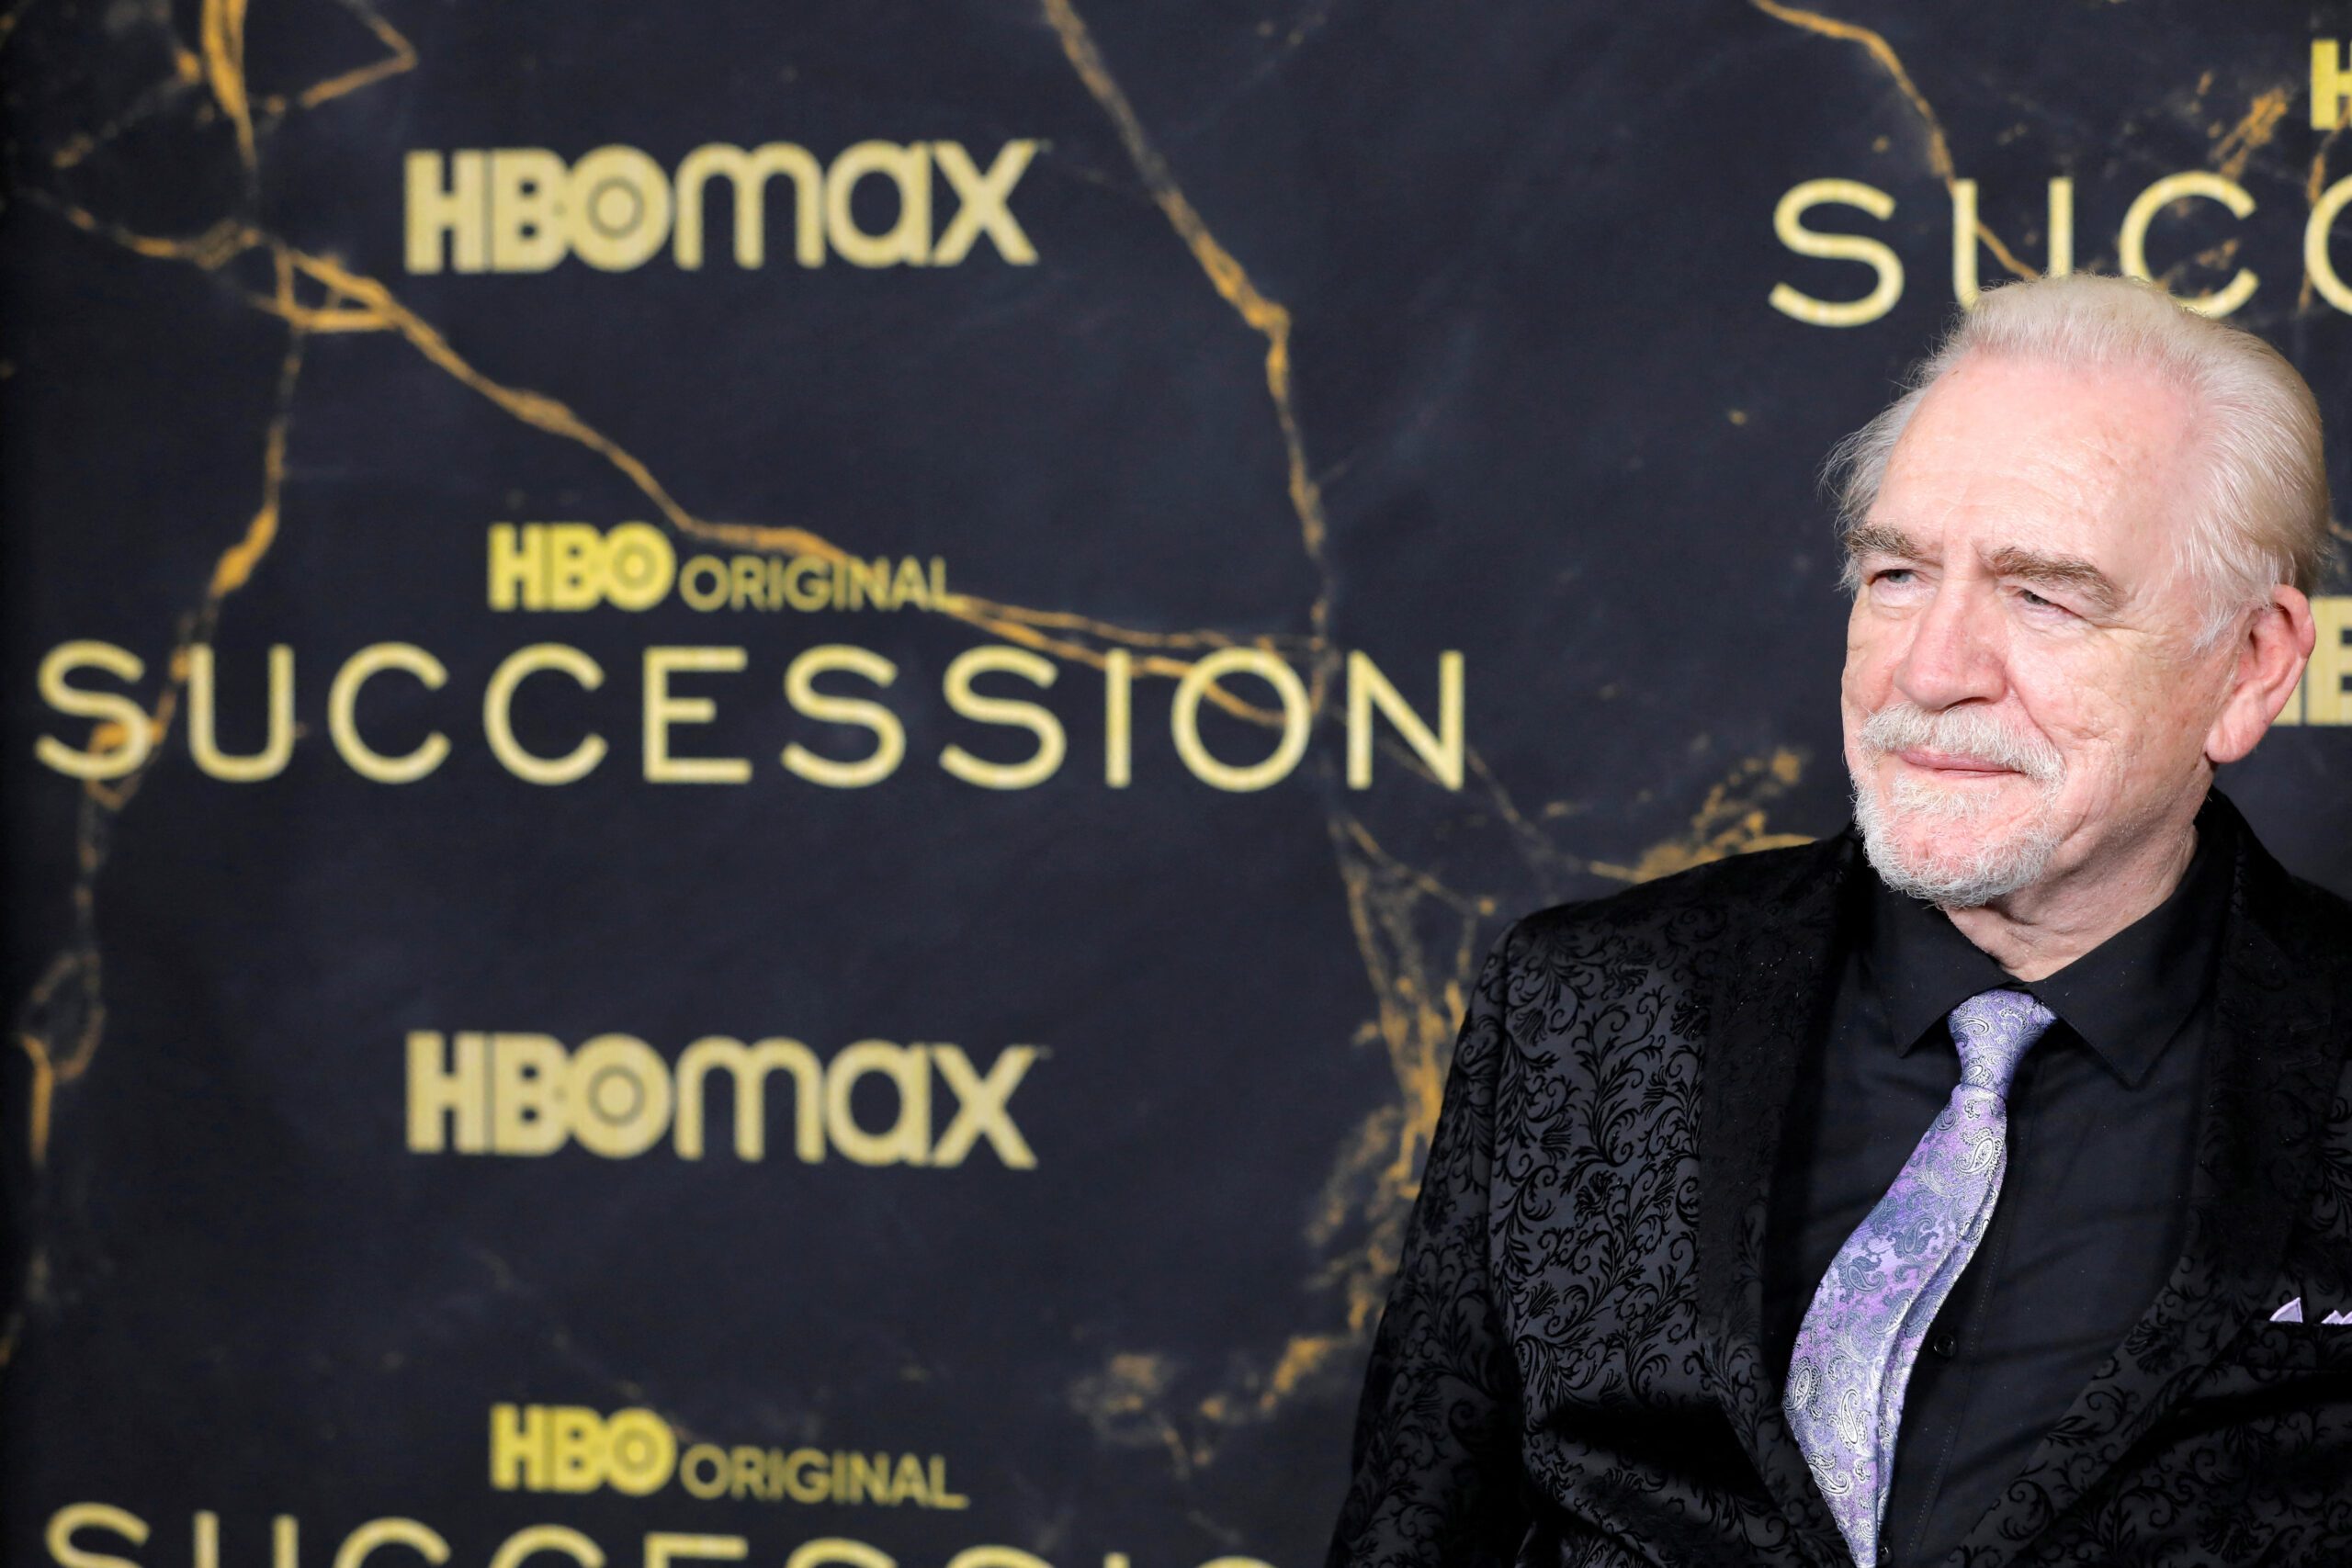 ‘Succession’ star Brian Cox gets into character at final season premiere